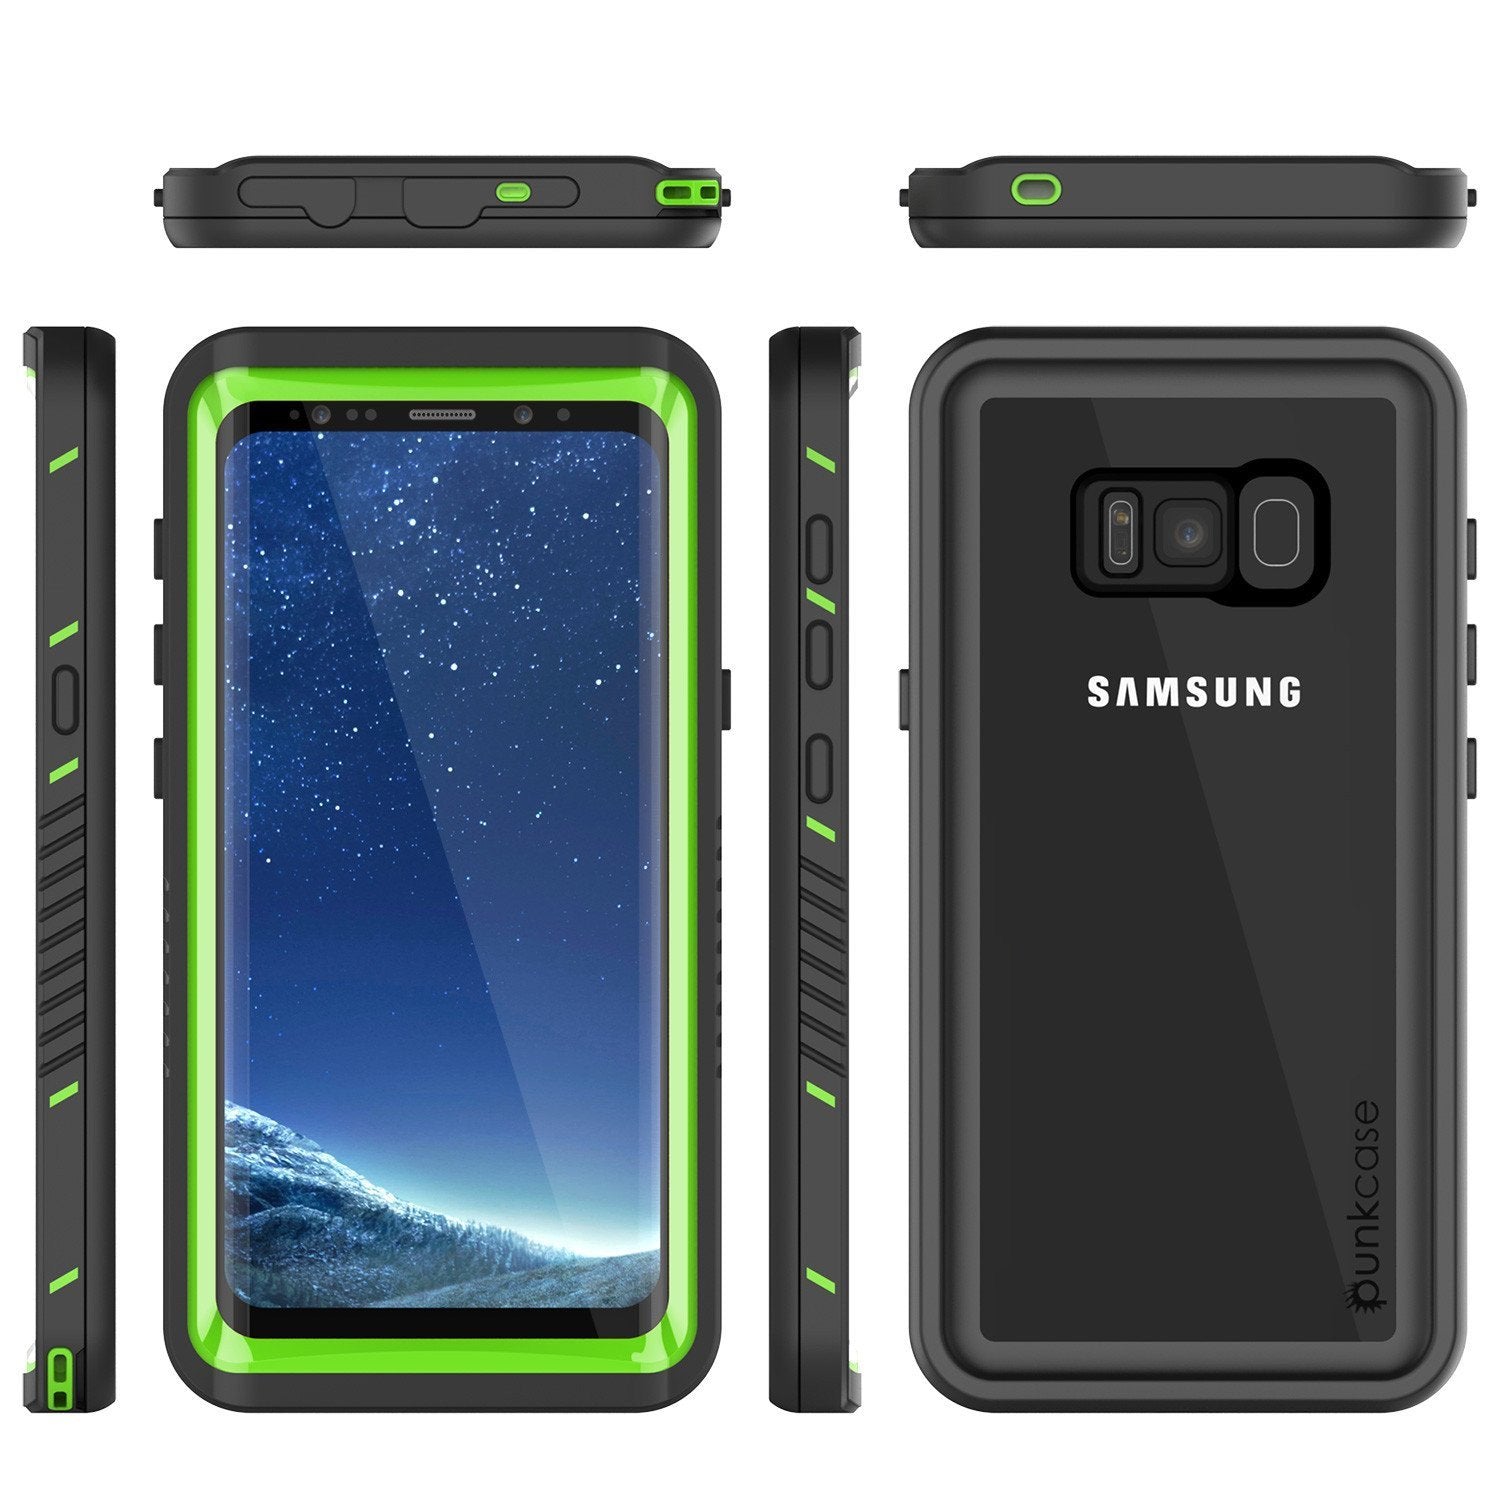 Galaxy S8 Case, Punkcase [Extreme Series] Armor Green Cover